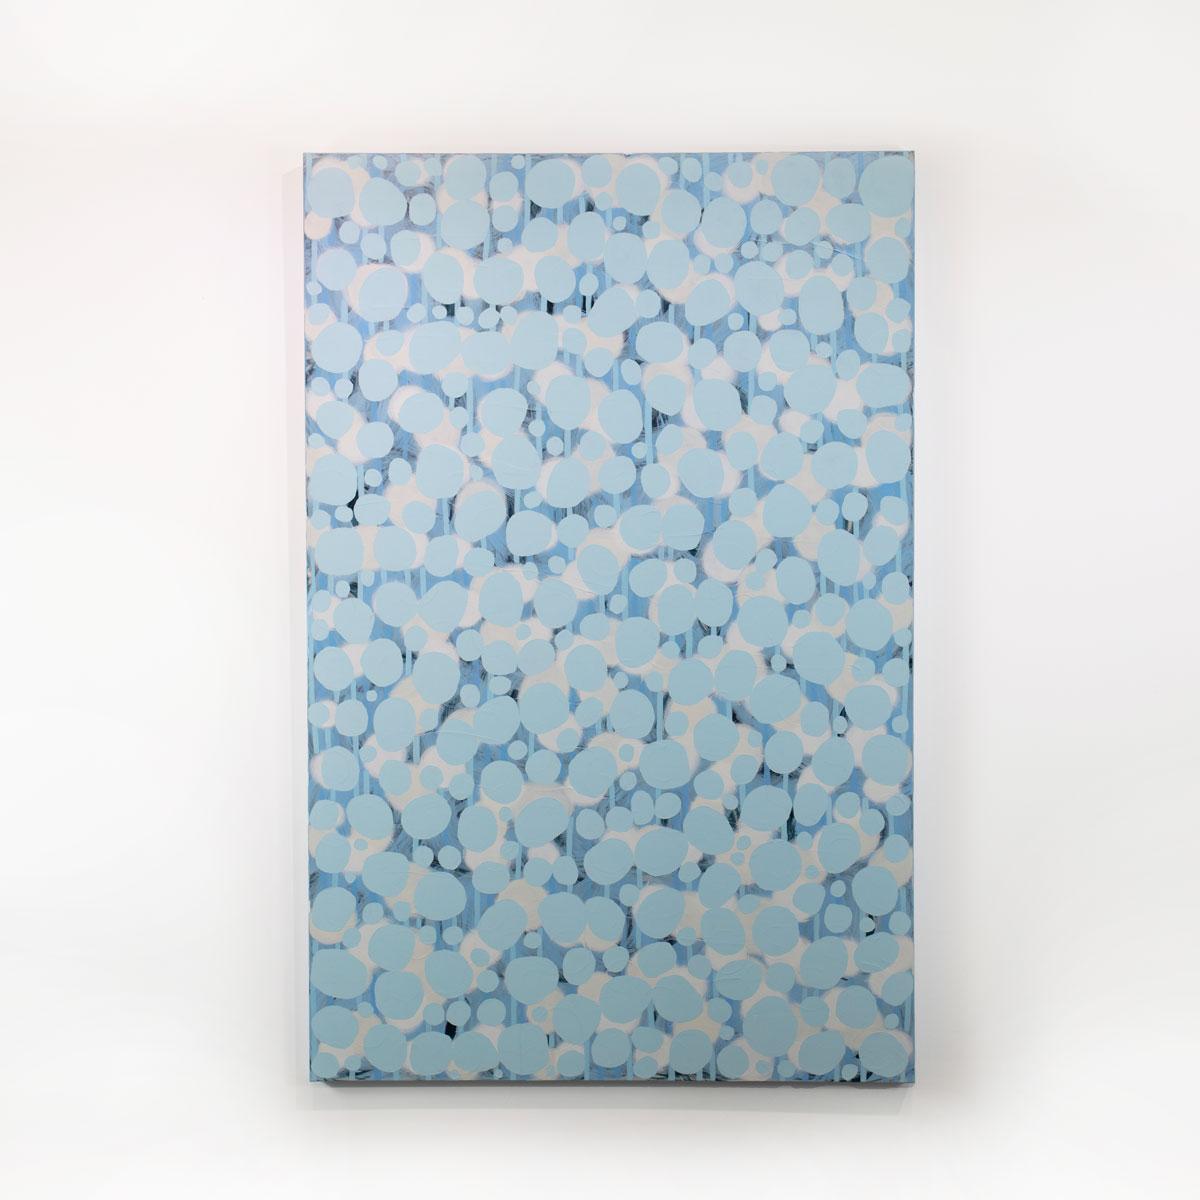 This large abstract statement painting by Sofie Swann features a light blue and white palette, with organic circular shapes layered throughout the canvas. This painting is made on gallery wrapped canvas with painted sides. It is signed by the artist